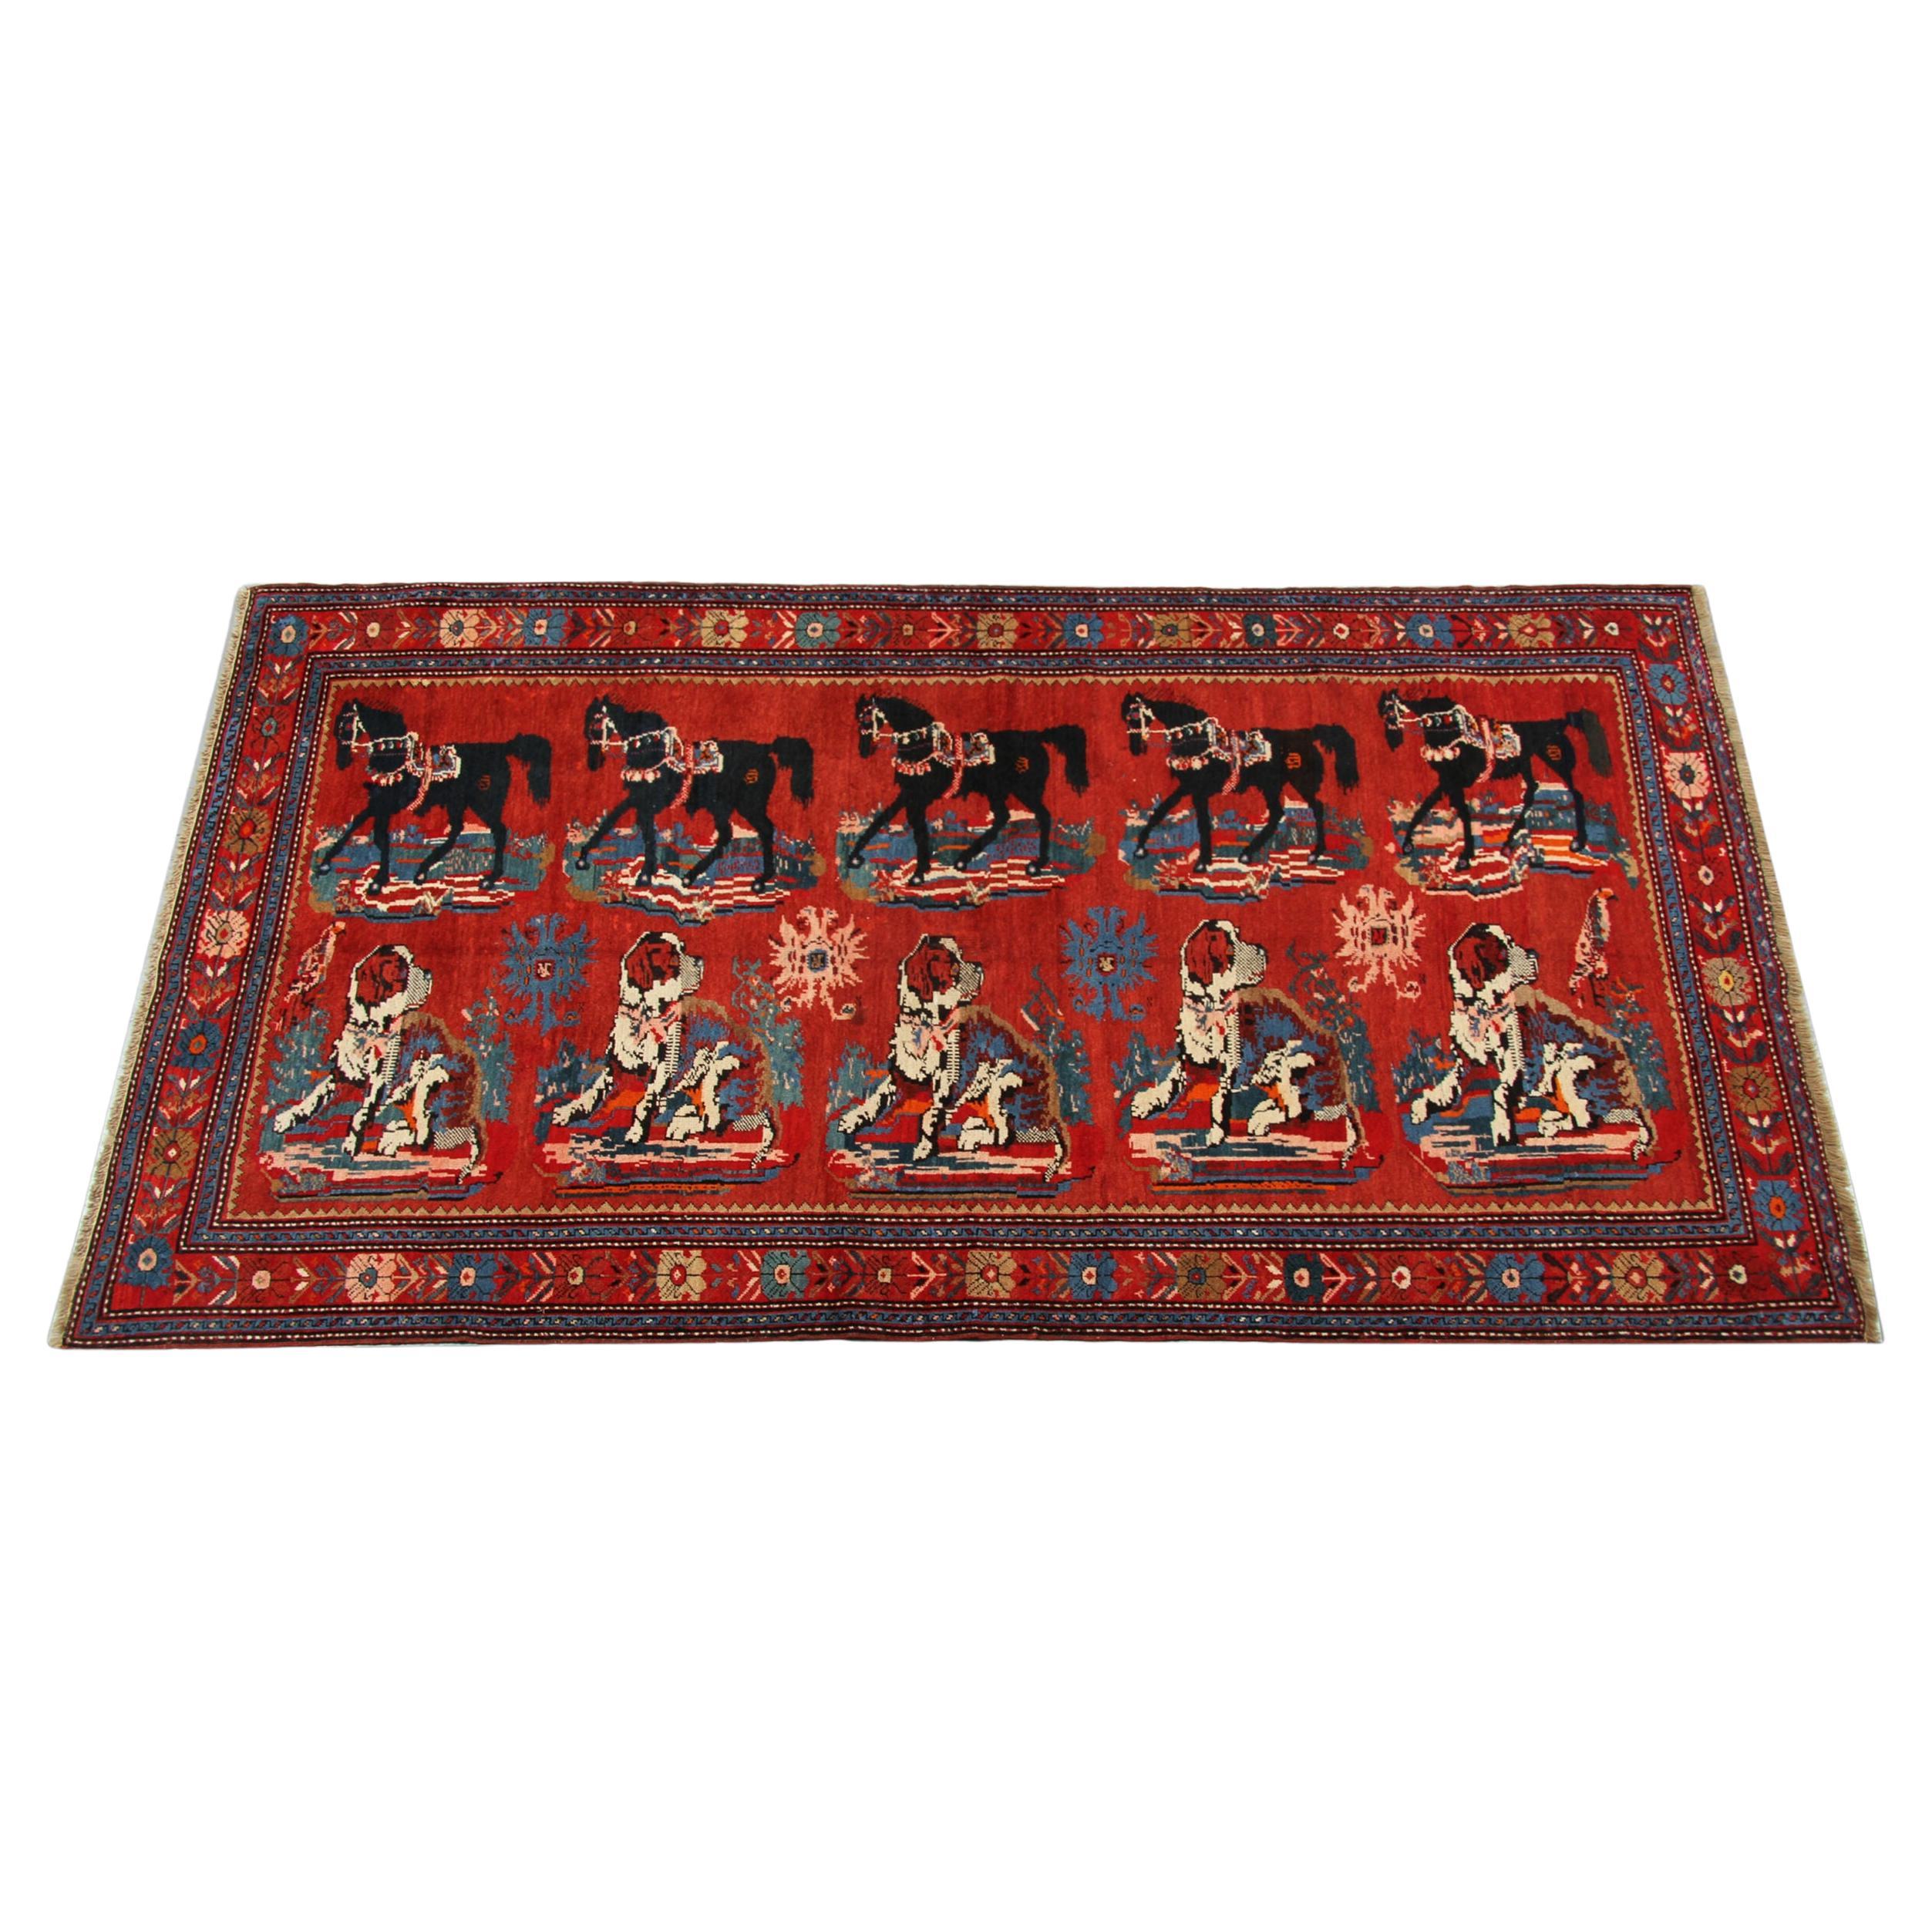 An excellent example of traditional Caucasian carpet rug weaving from the Karabagh region. These pictorial animal design patterned rugs can be the best element of home decor objects to give warmth to the environment, because this woven rug has a